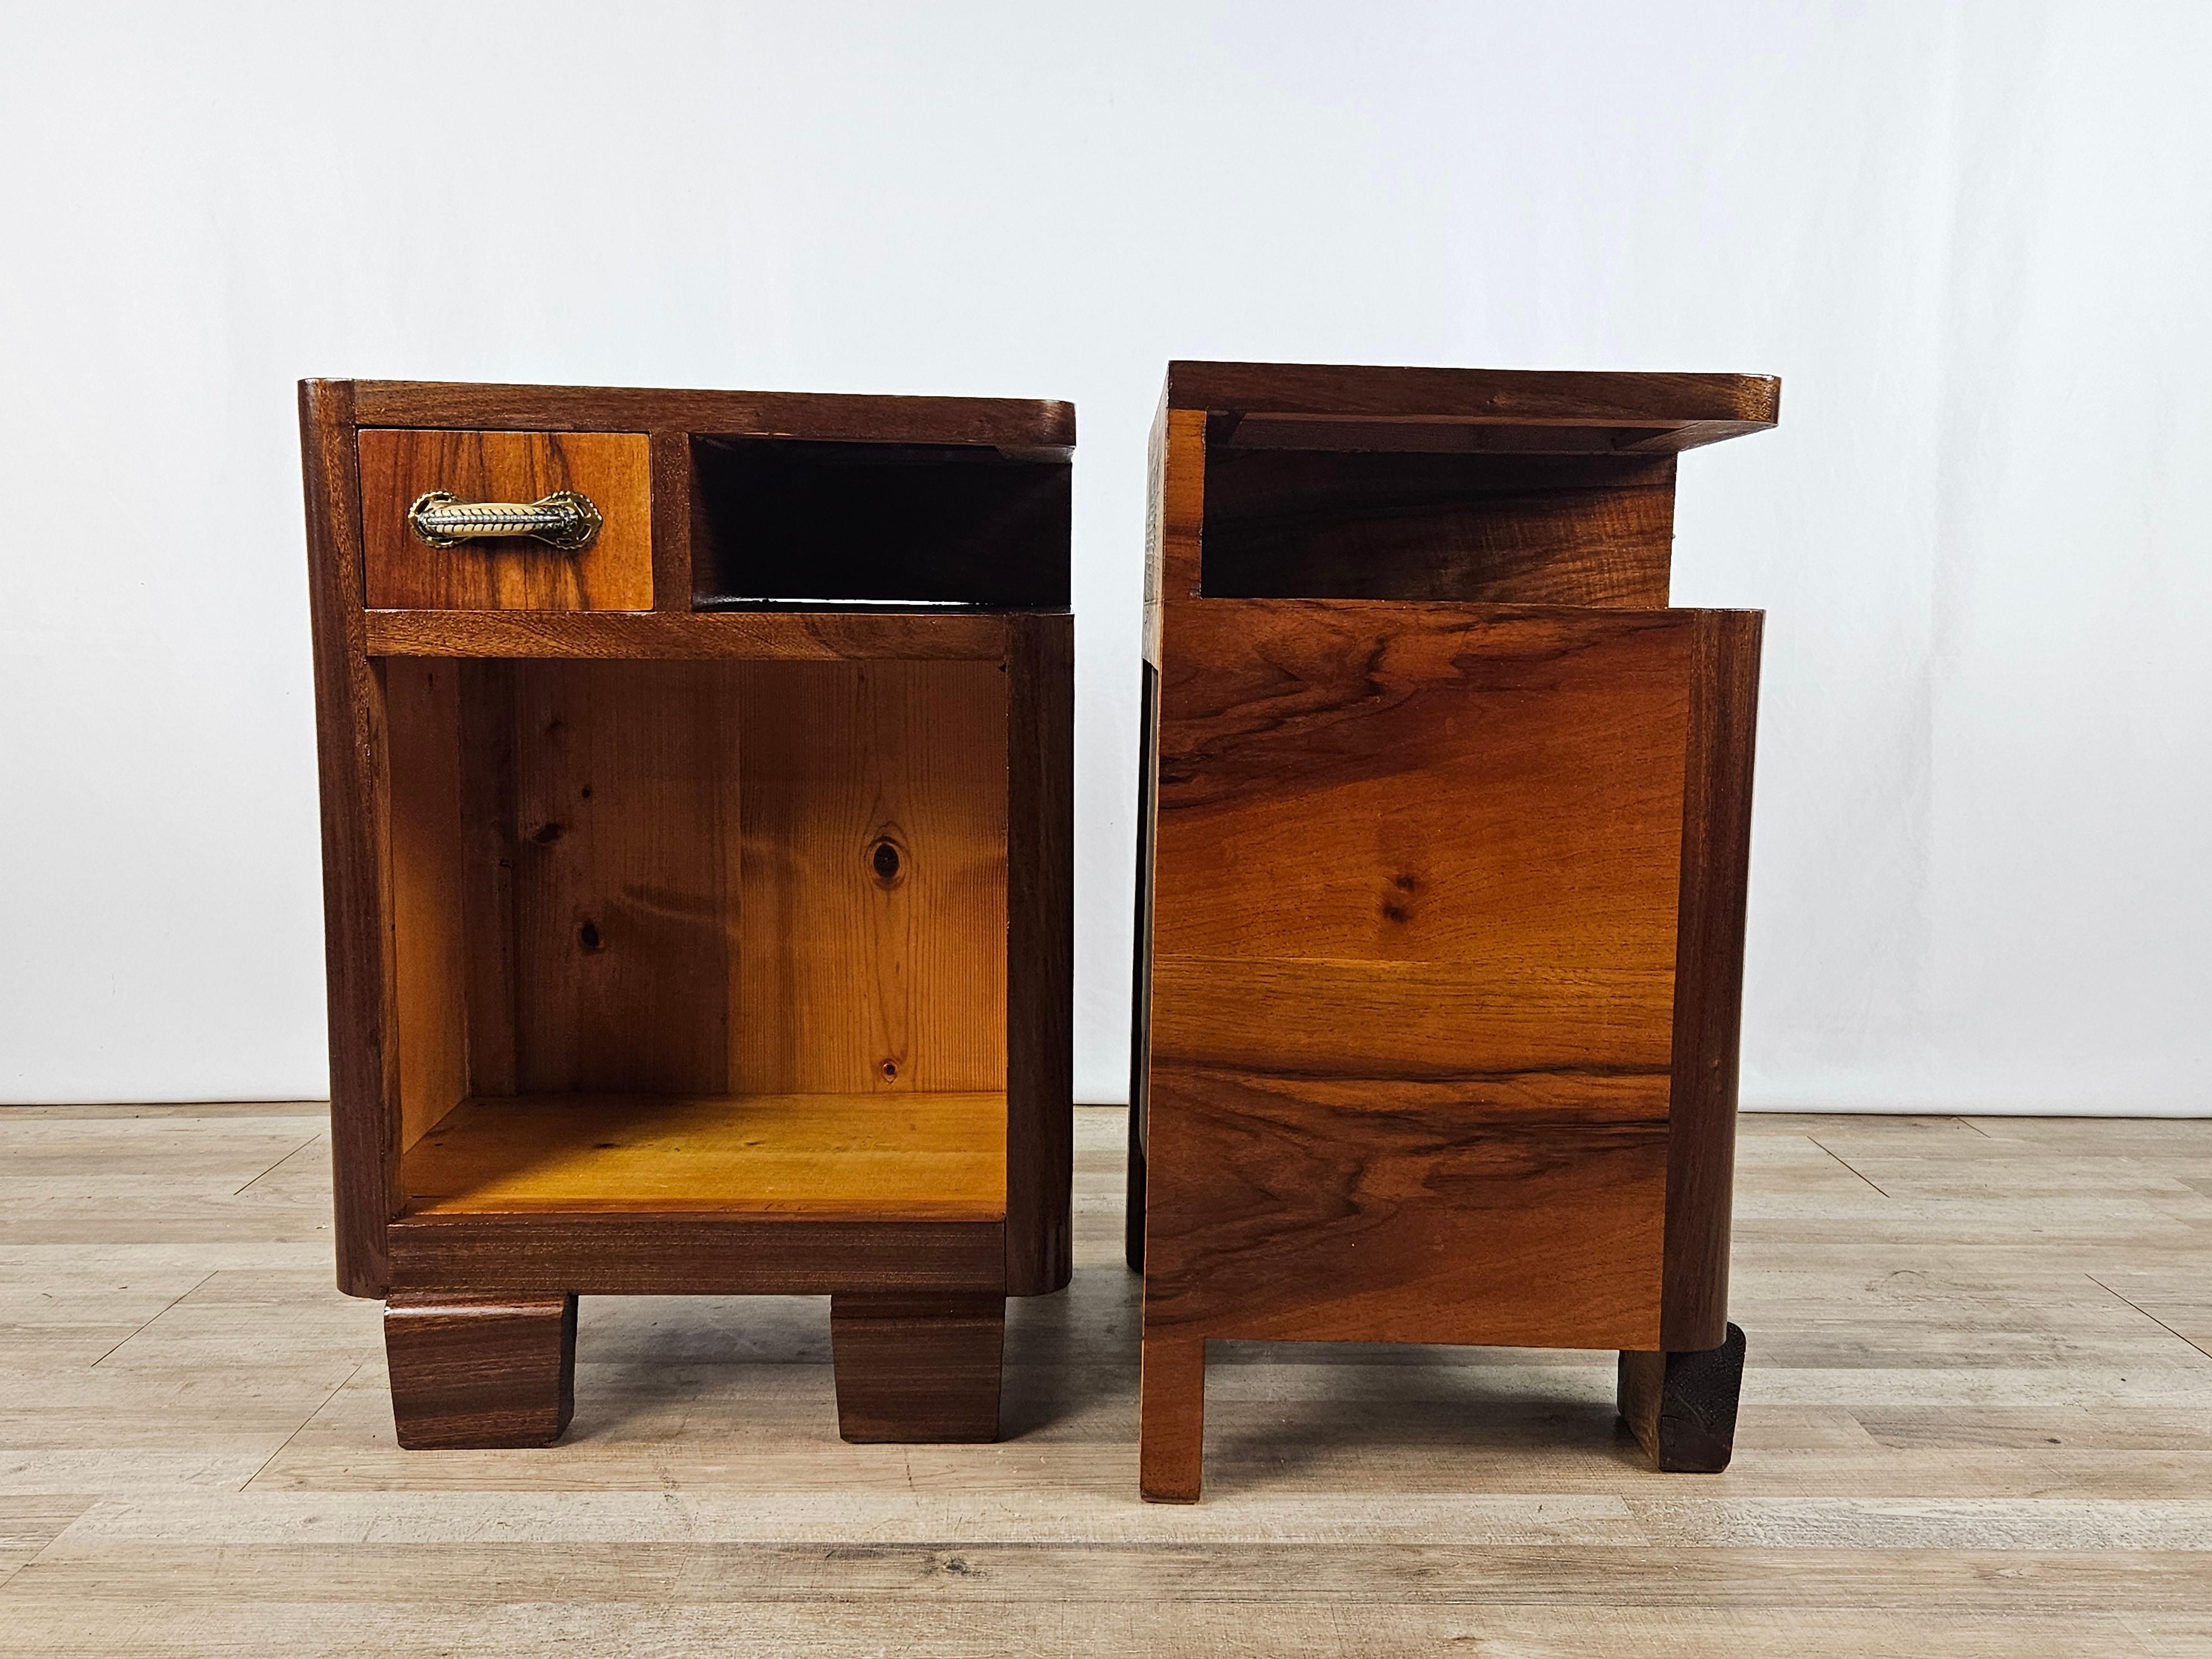 Pair of 1940s bedside tables in walnut burl and mahogany with top drawer and large open space inside.

Nightstands are positional anywhere because of their modern and functional design.

Polished with oil and shellac.